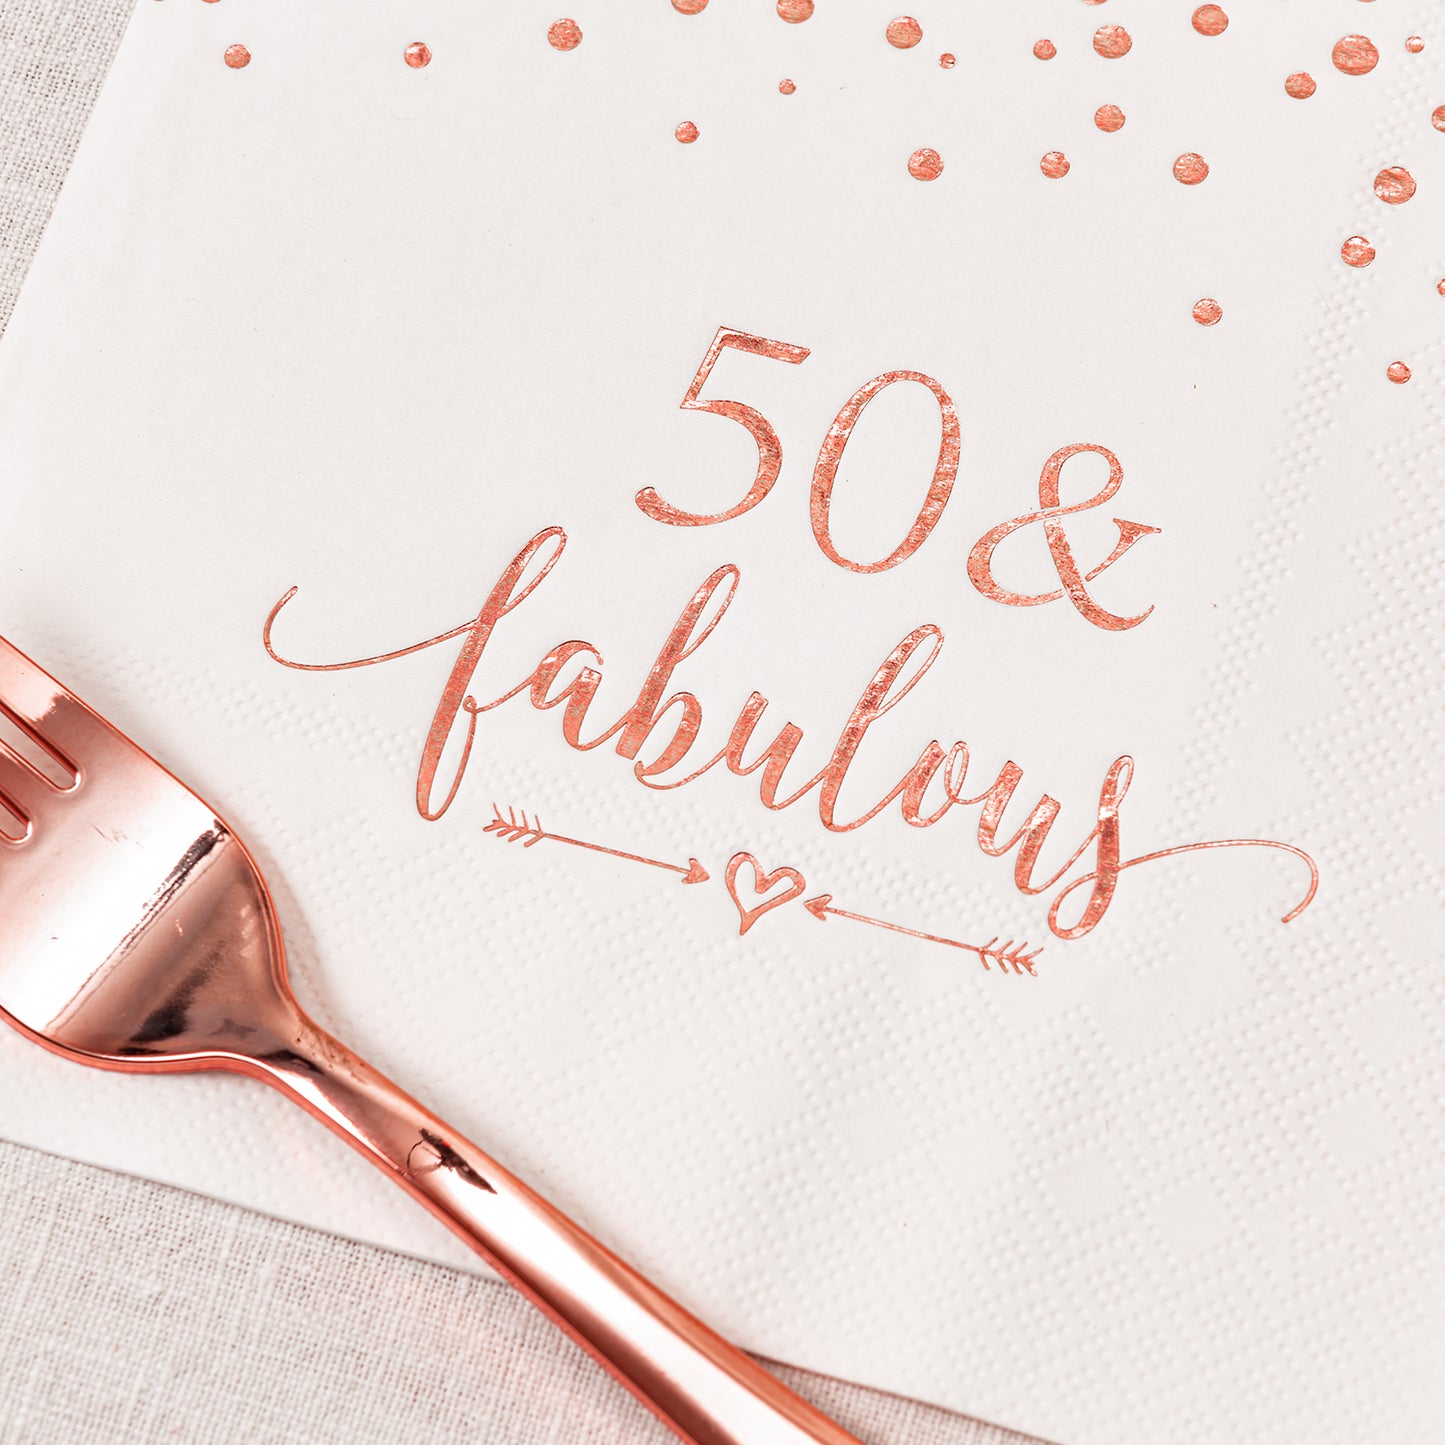 Crisky Rose Gold 50 Fabulous Napkins Plates Cups Set for Women 50th Birthday Party Decorations Supplies, Disposable Tableware Set of 24 (9" Plates, 7" Plates, Luncheon Napkins, 9oz Cups)